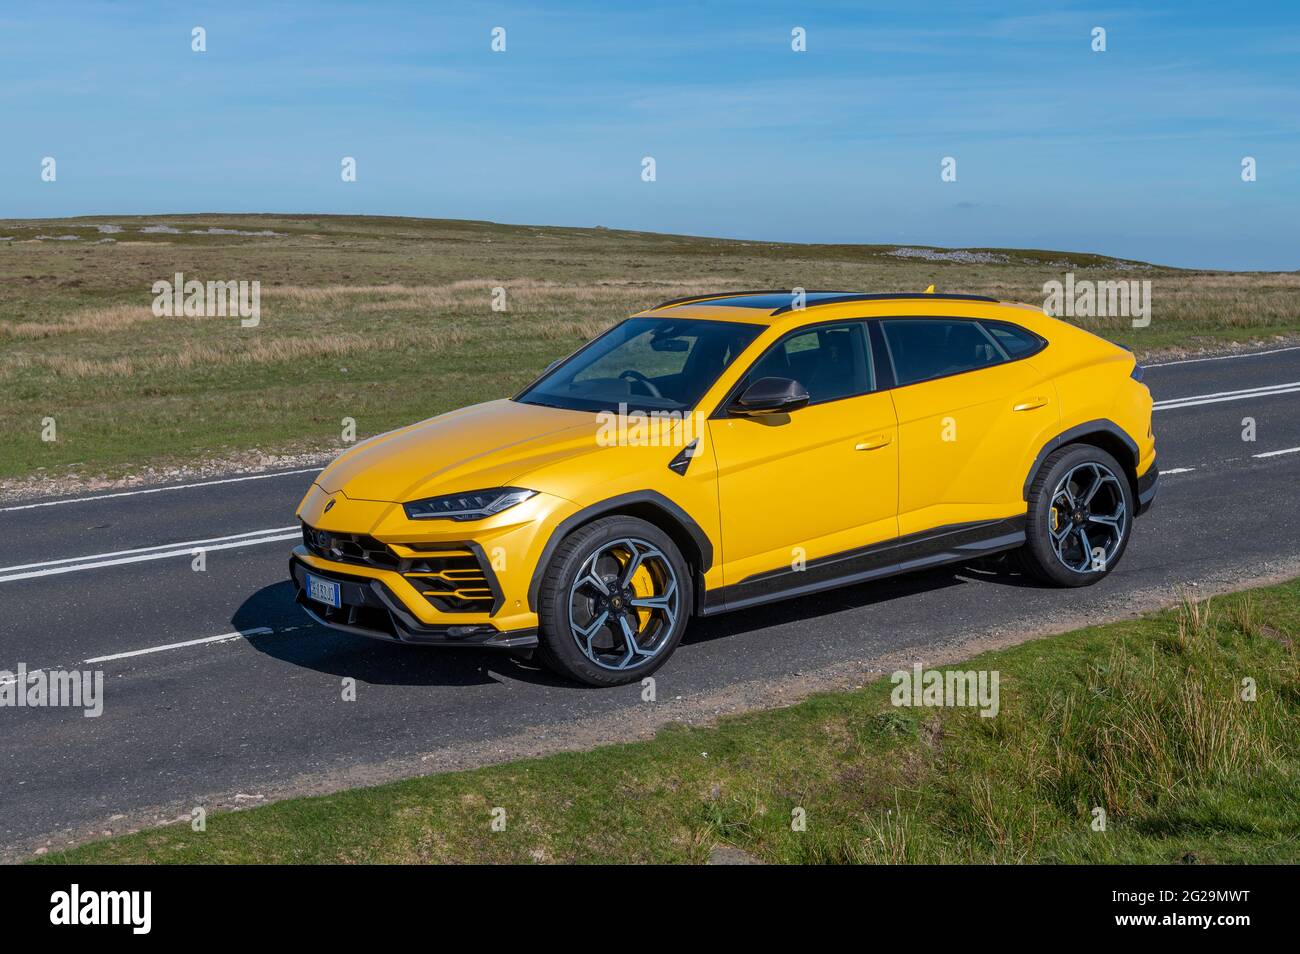 A Lamborghini Urus SUV photographed in the evening sunshine at Llangynidr, Powys, Wales, UK. Spec: 4 litre twin turbo V8 engine 0-62 mph 3.6 secs Top Stock Photo